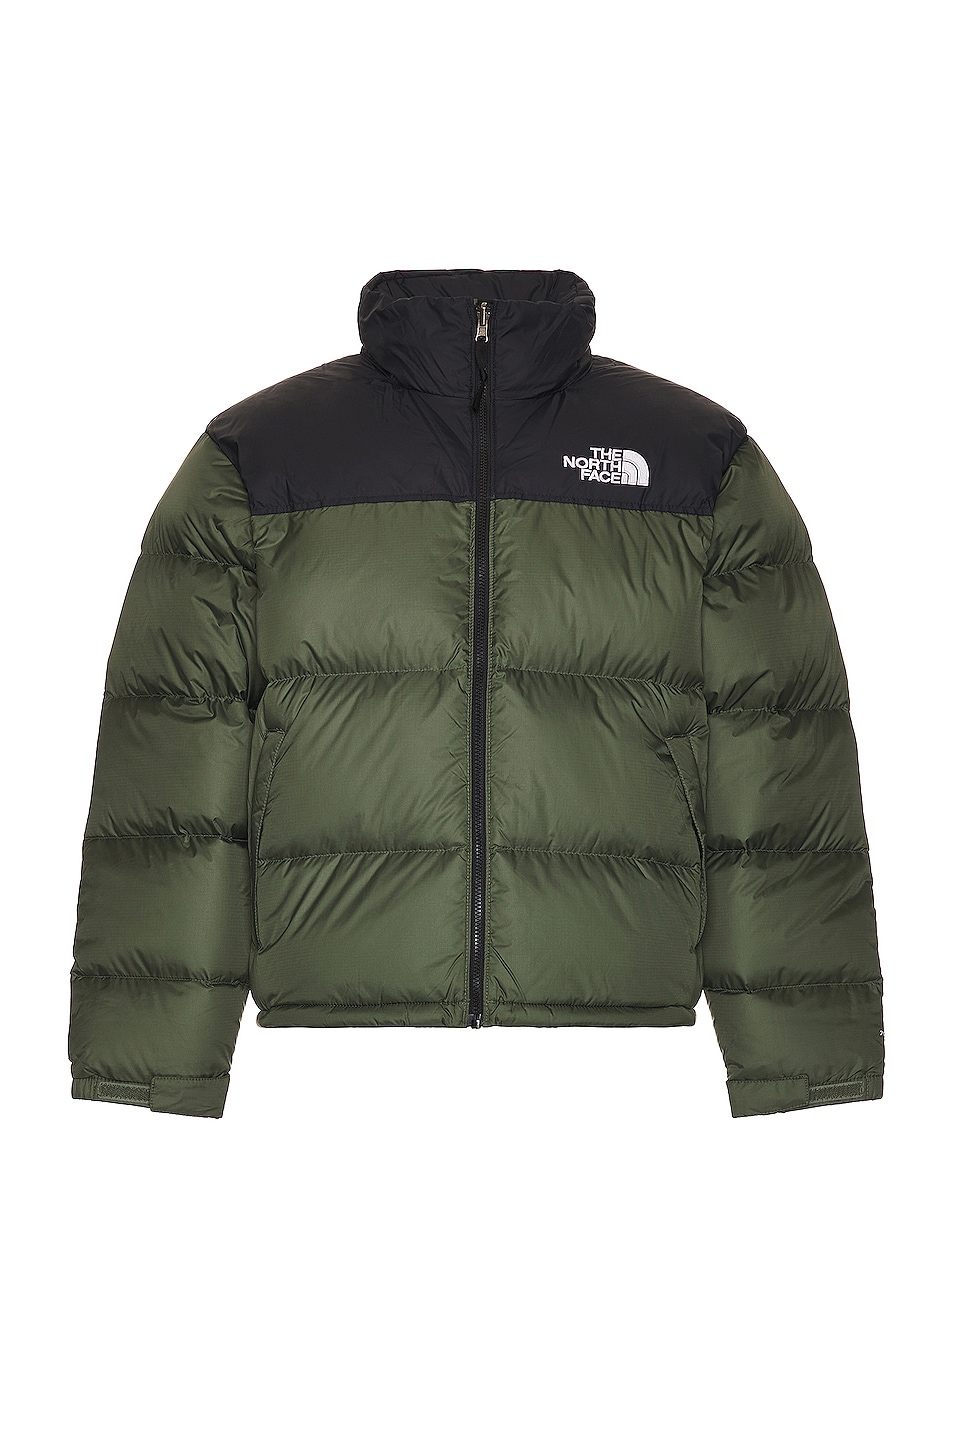 The North Face 1996 Retro Nuptse Jacket in Thyme | FWRD